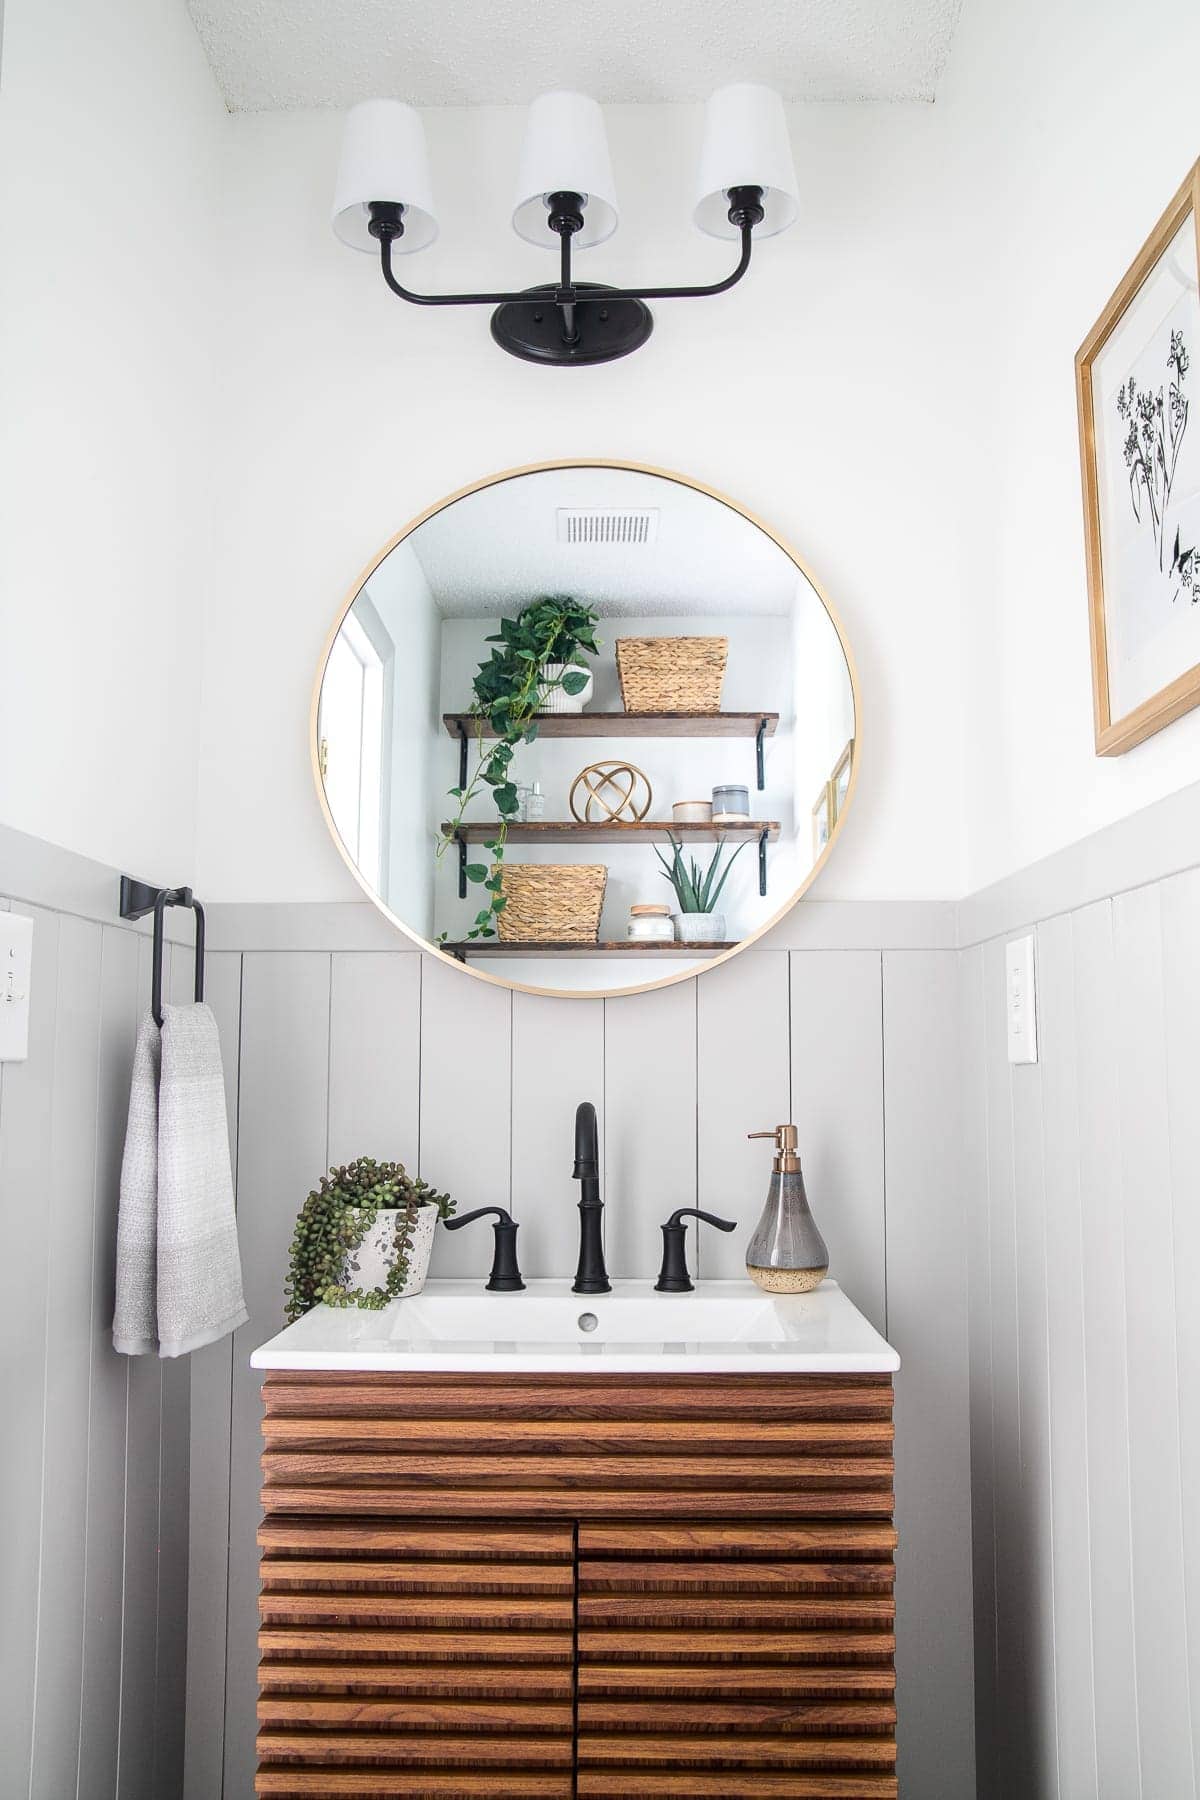 gray vertical shiplap with white walls and wood vanity in a bathroom - wall molding